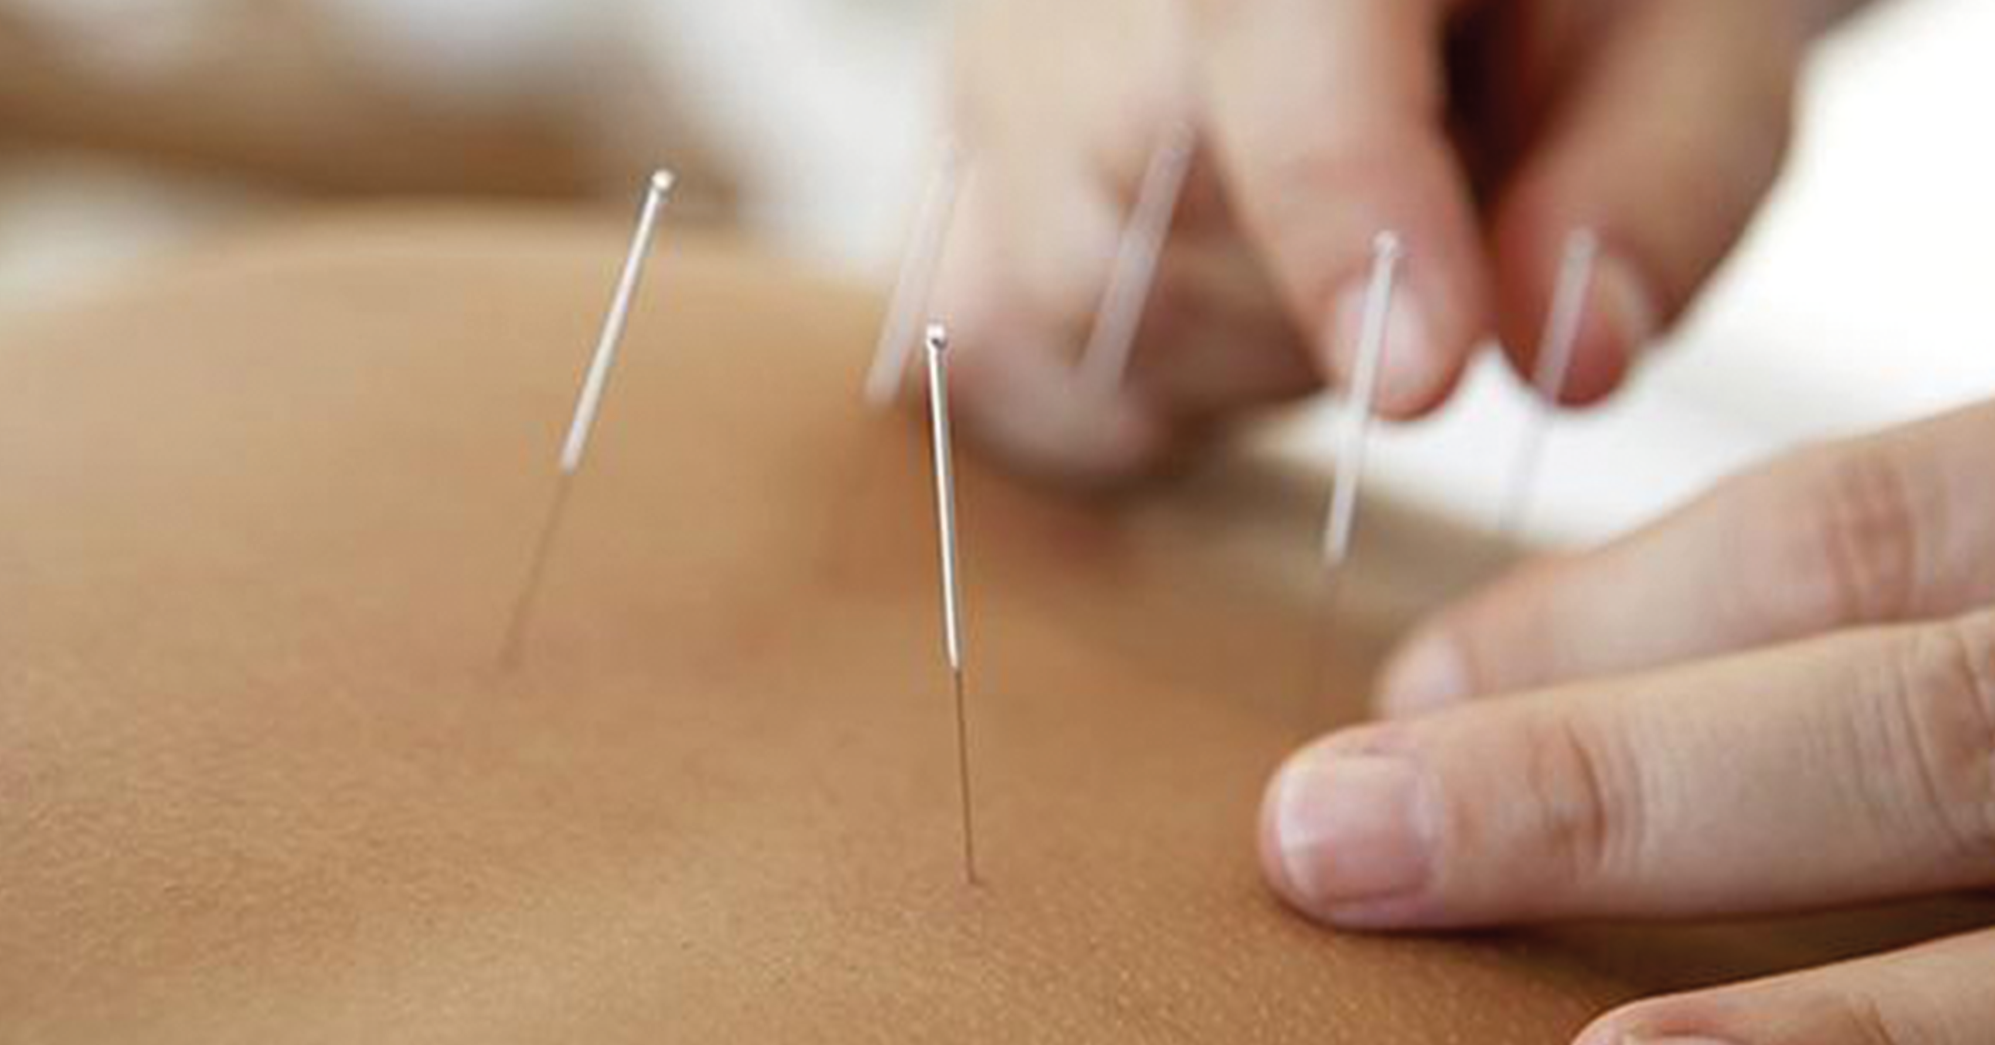 Acupuncture for sports